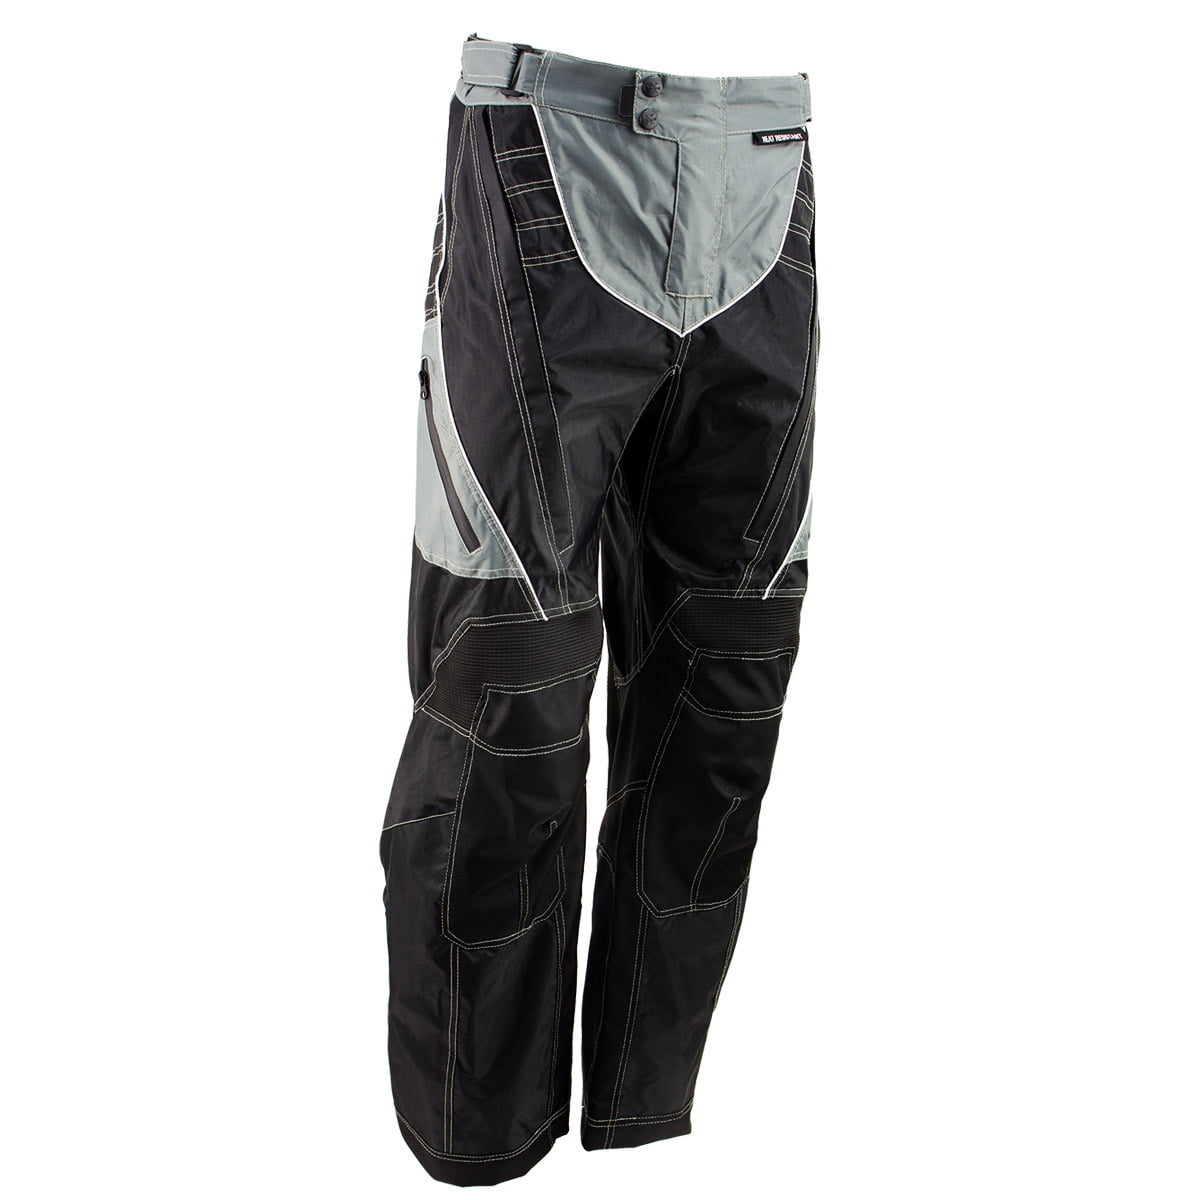 W 36 L 32, Silver Jet Mens Motorcycle Motorbike Mesh Textile Summer Trousers Breathable Protective Armored VENT-X 